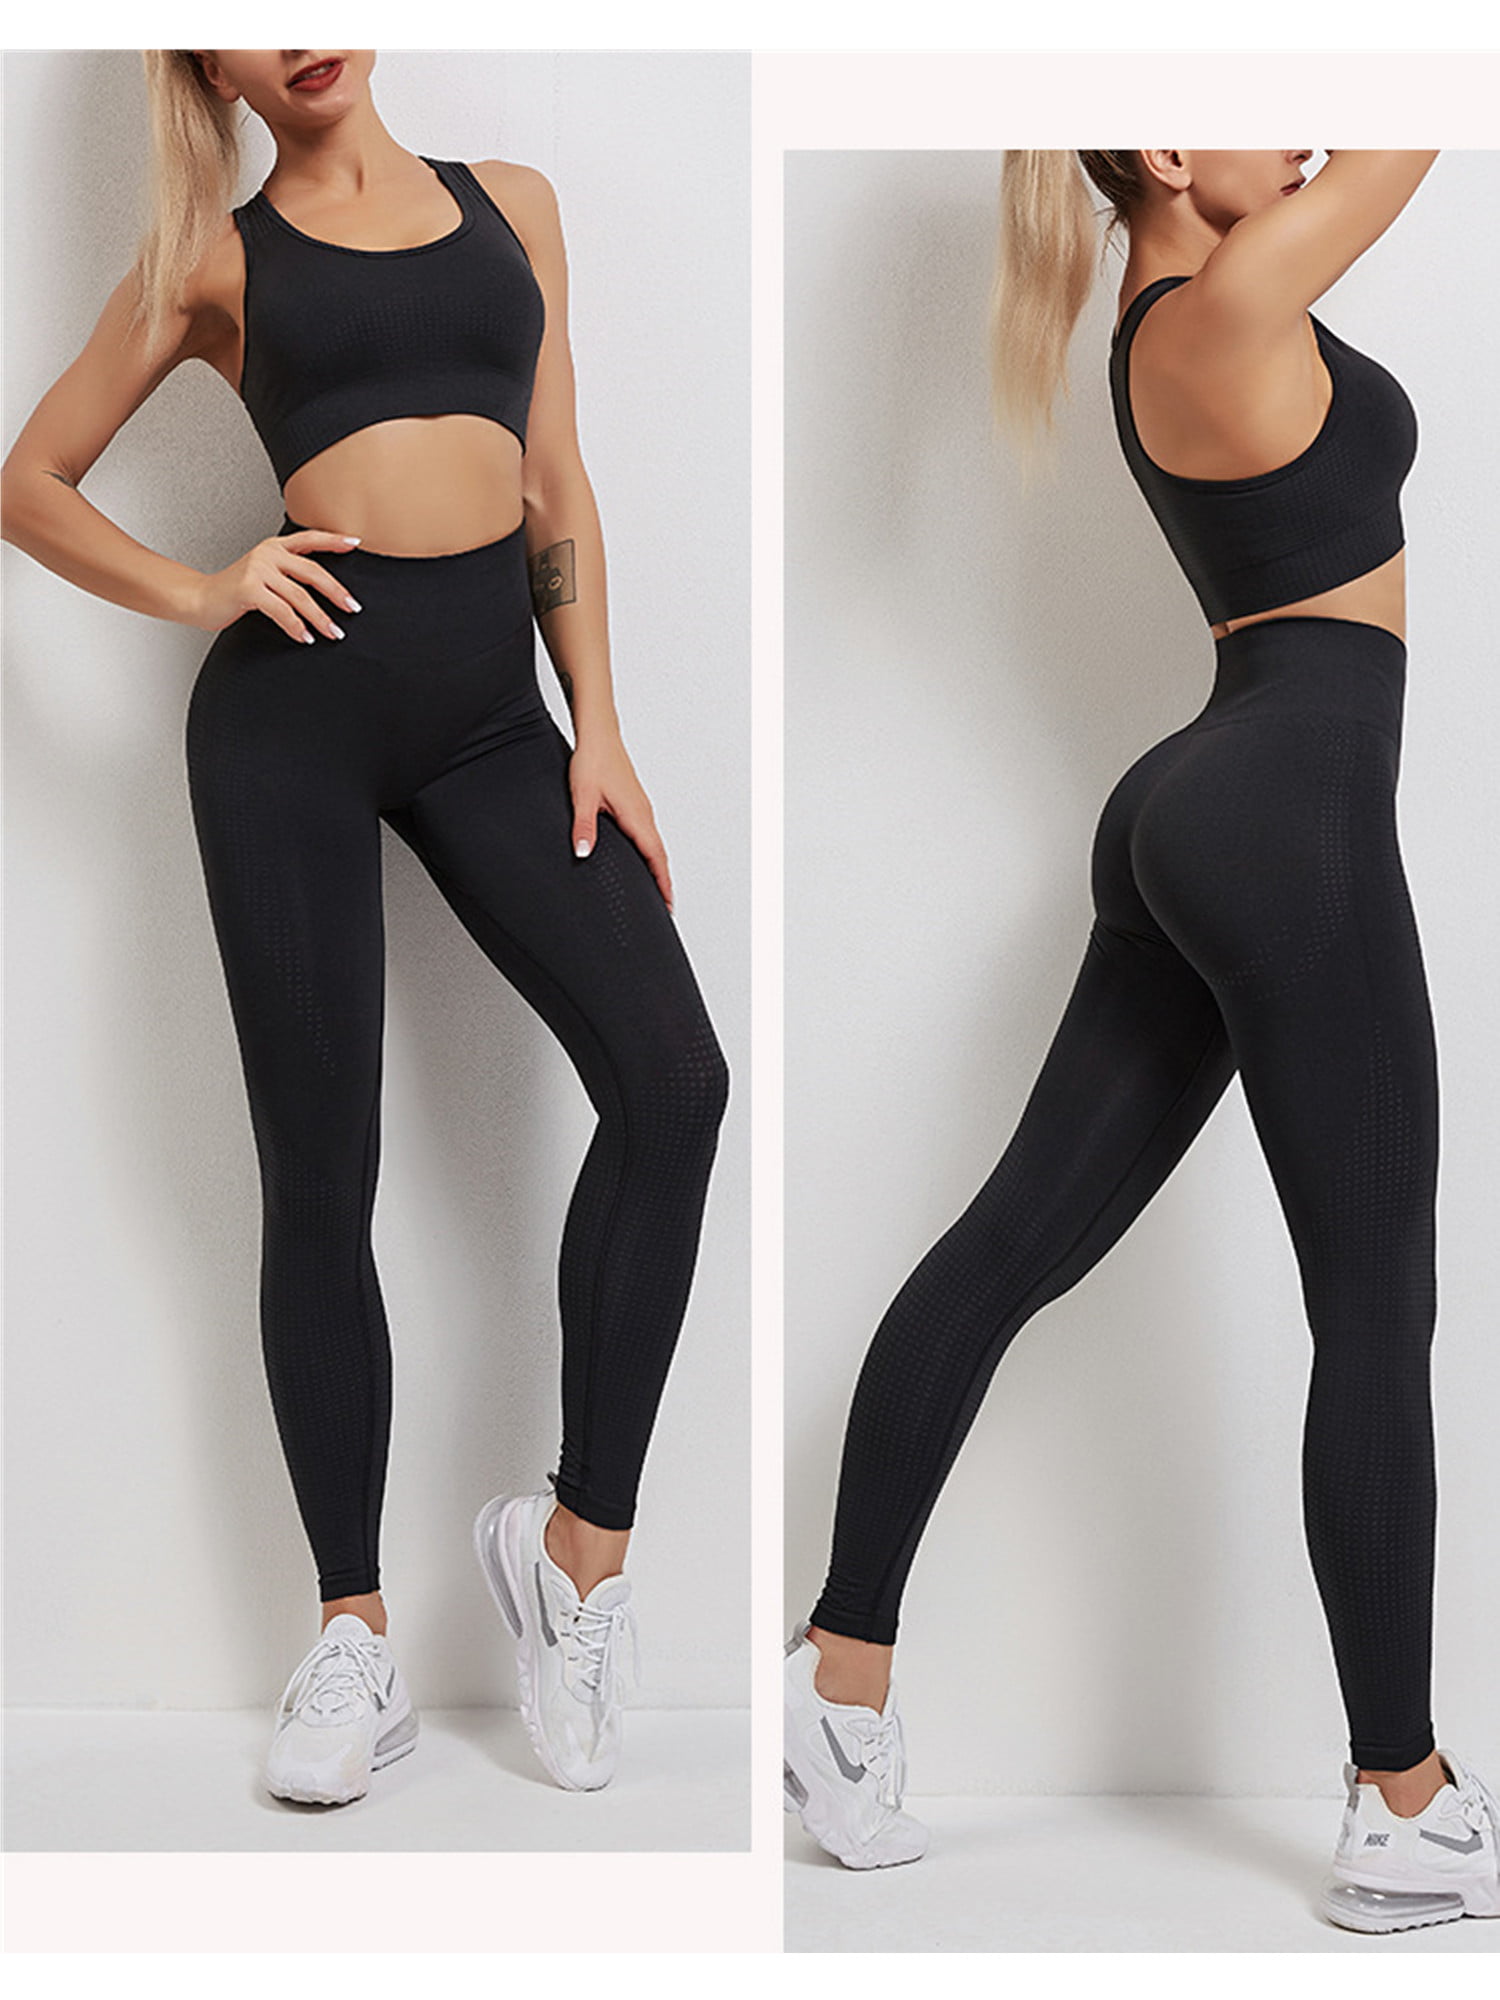 Tracksuit Fitness Yoga Set Ribbed Stretchy Sports Suit Top High Waist Leggings Shorts Elasticity Slim Sportwear Outfits Jogging Tracksuit Fit Women Yoga Suit Fitness Two Piece Suit